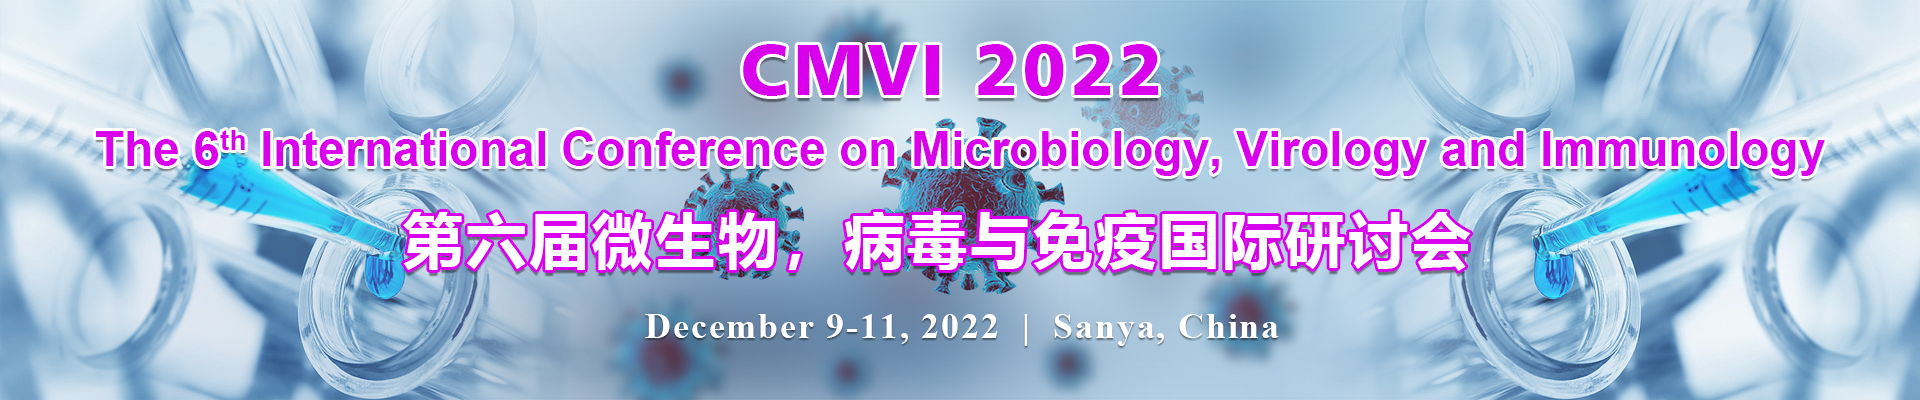 The 6th International Conference on Microbiology, Virology and Immunology (CMVI 2022)